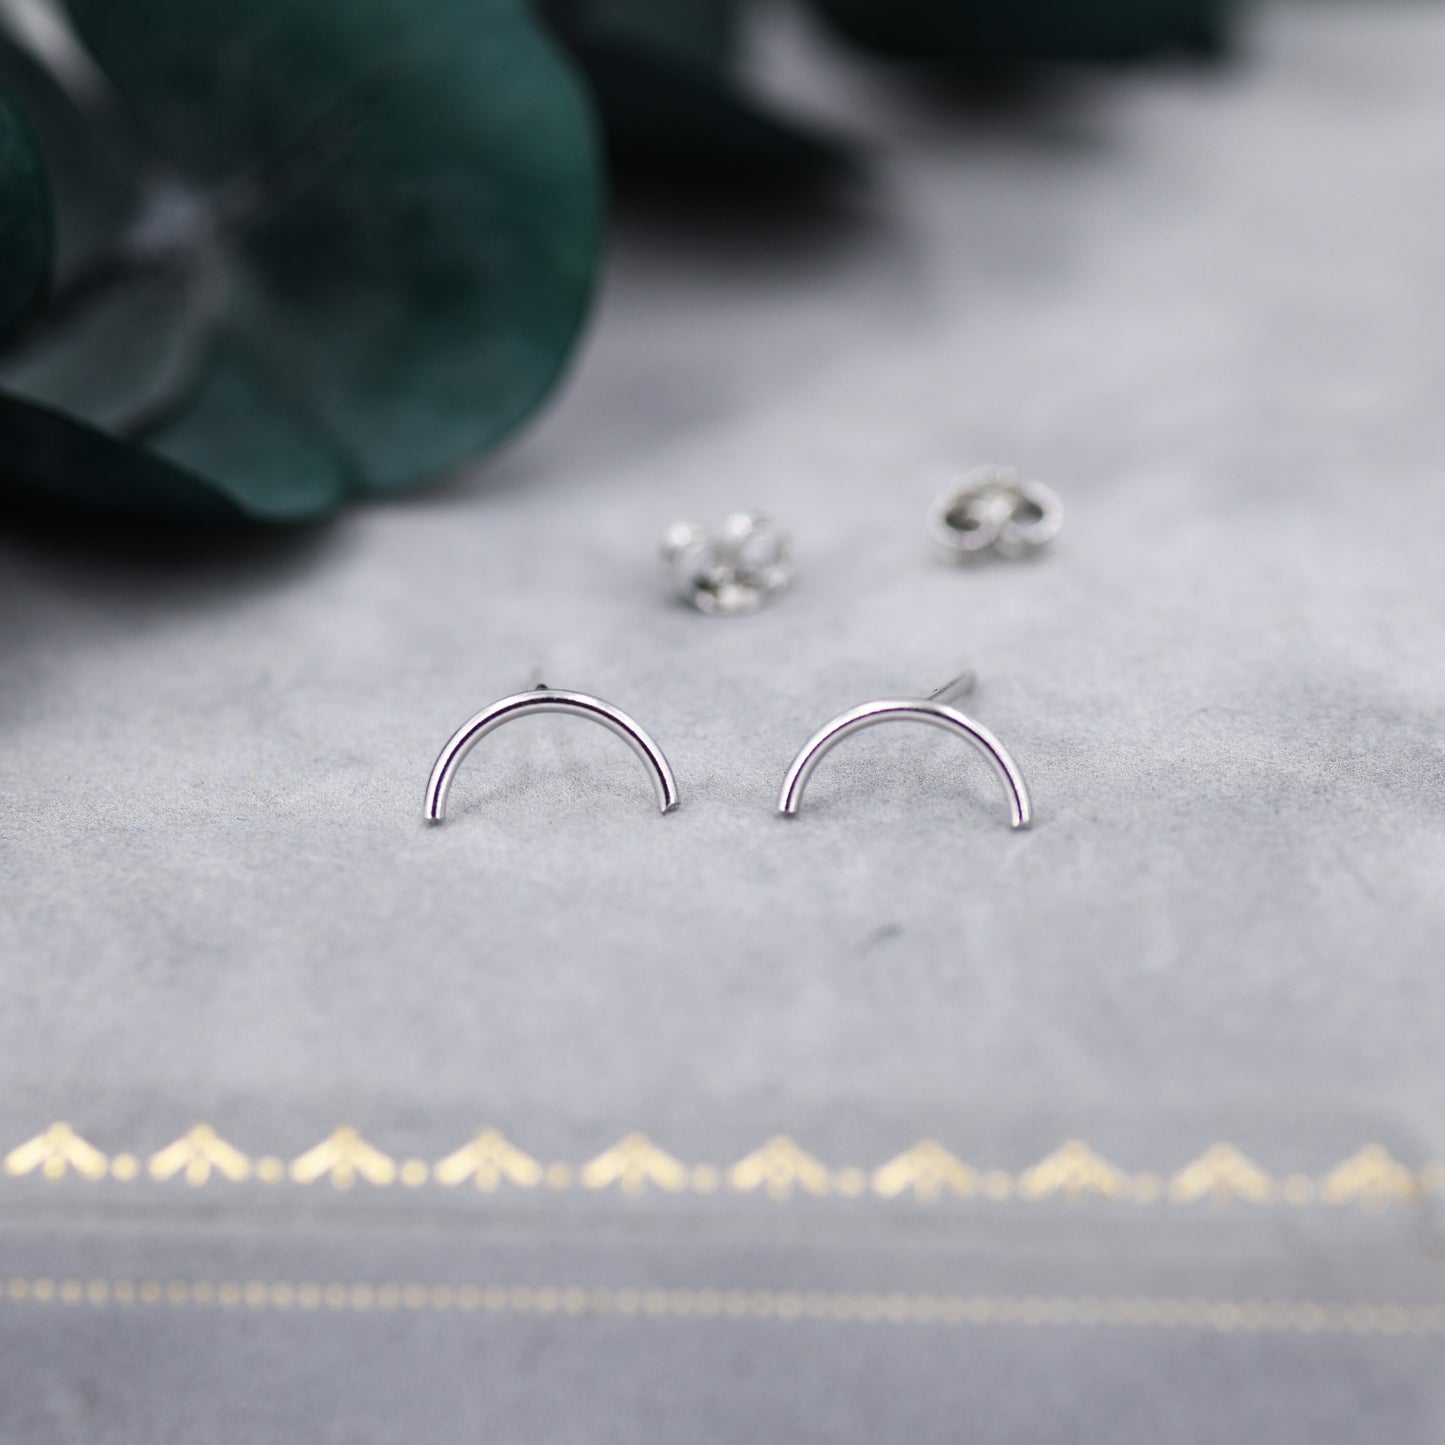 Delicate Curved Bar Stud Earrings in Sterling Silver, Gold or Silver, Simple and Minimalist, Geometric, Discreet